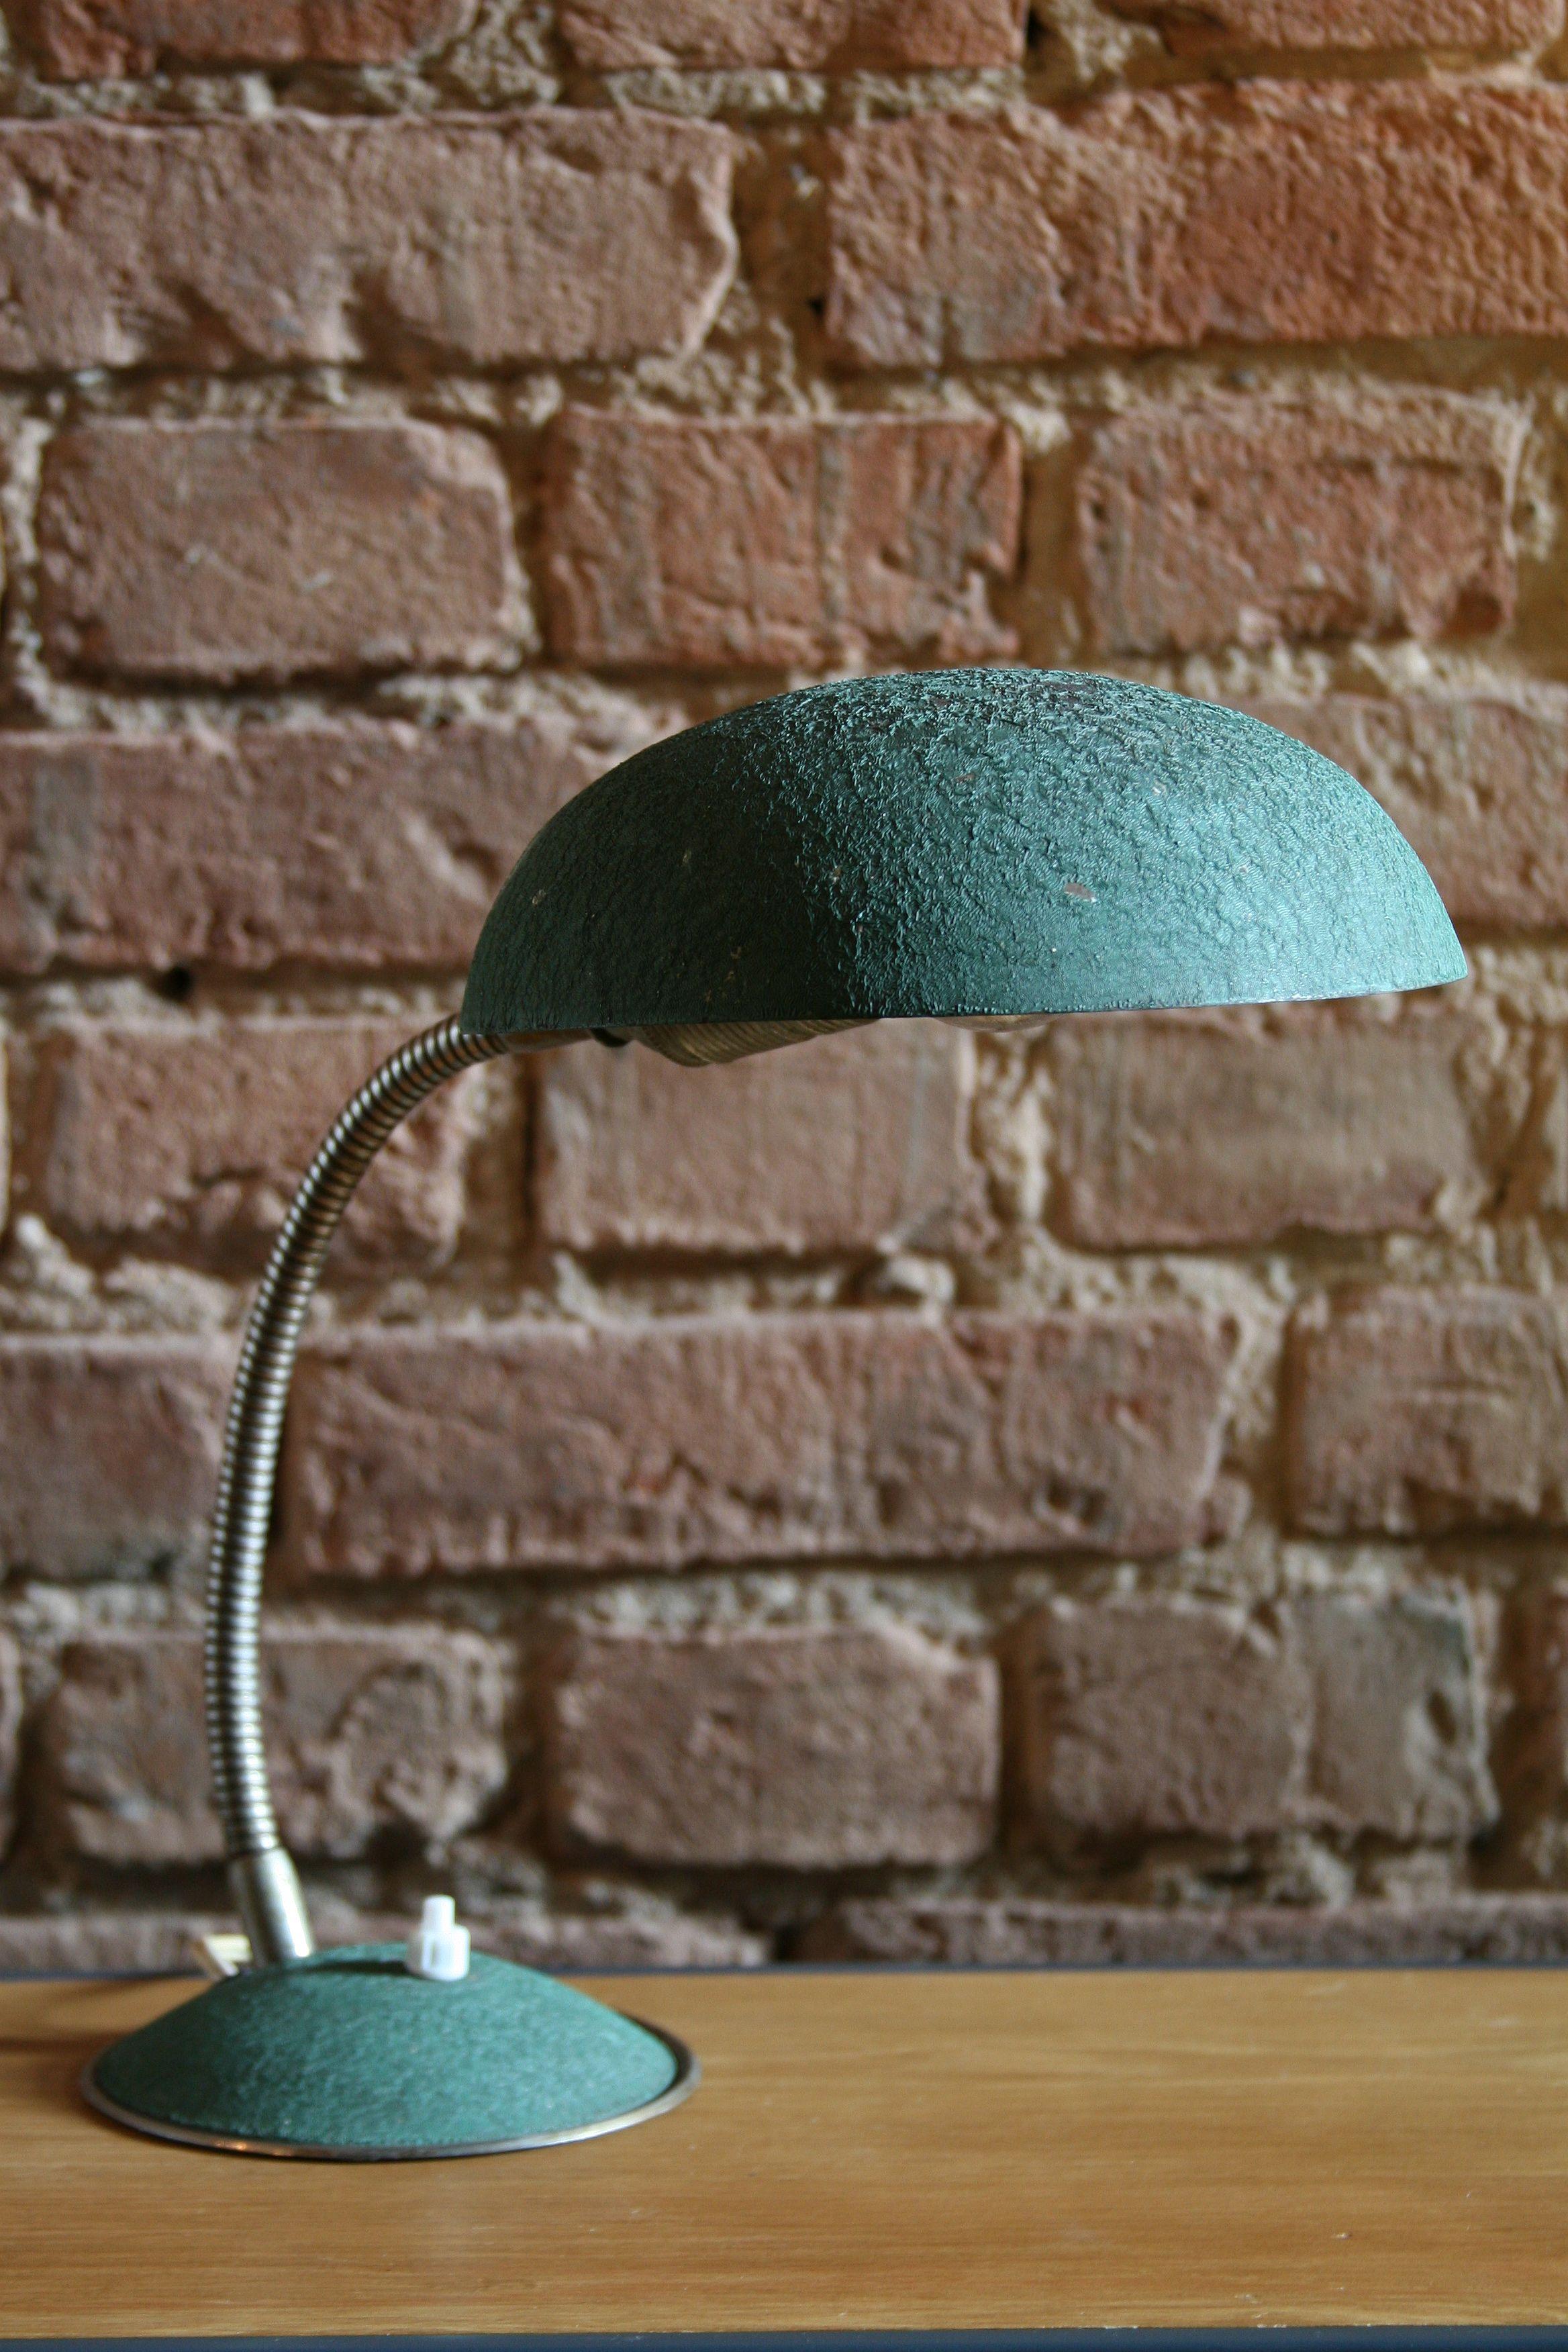 Polish table lamp from the 1960s produced by Warszawska Spóldzielnia Rzemieslnicza (Warsaw Craft Cooperative).

Construction:
Two-part round base is made of profiled sheet. Inside, there is a stabilizing cast iron filling.
In the upper part of the